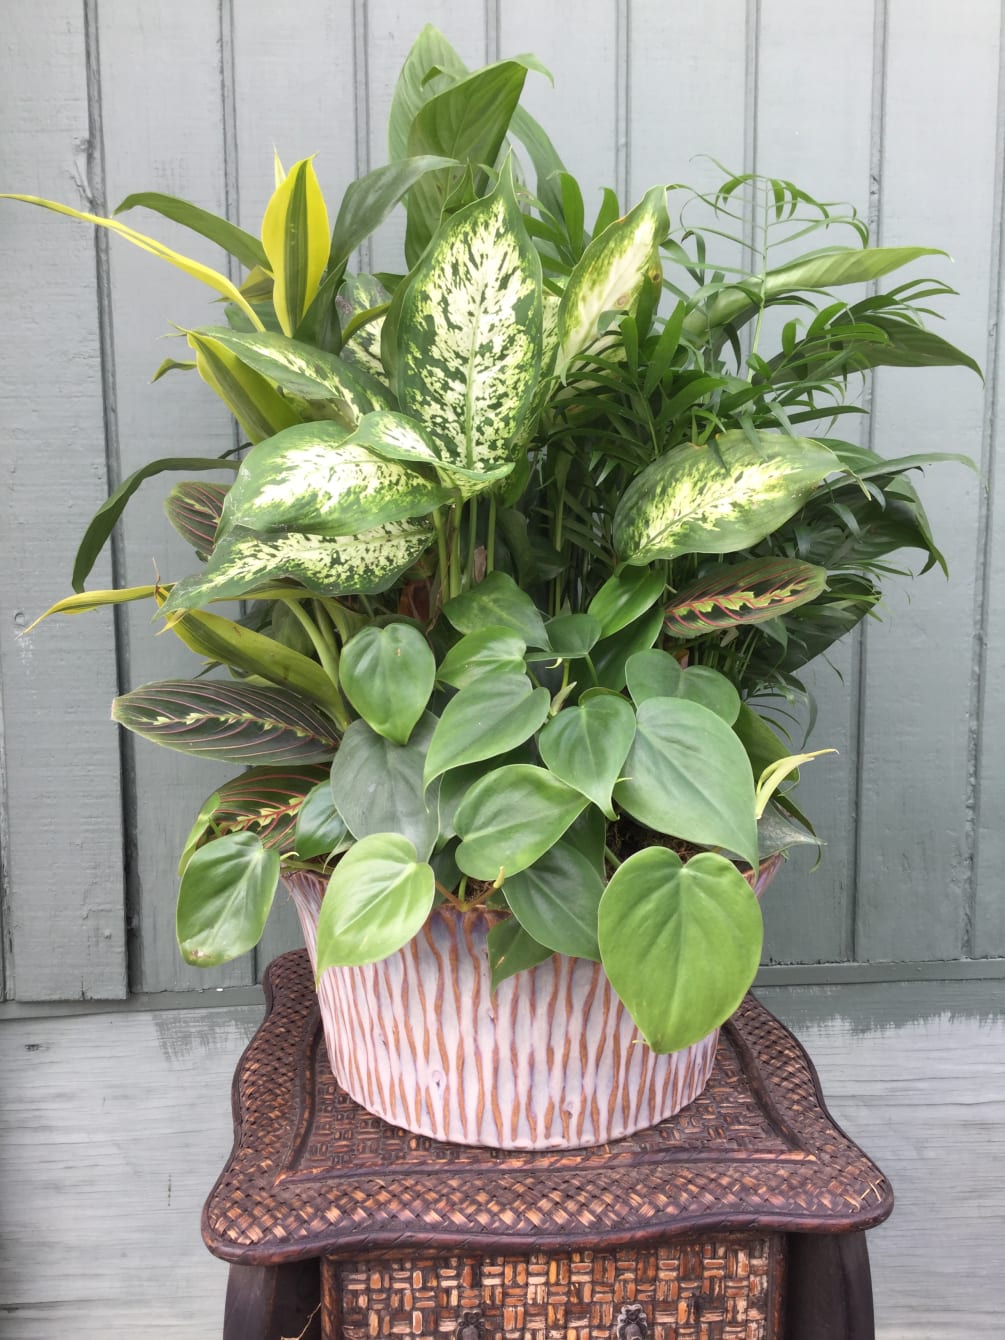 Lush assortment of green indoor plants in a ceramic container. Containers may